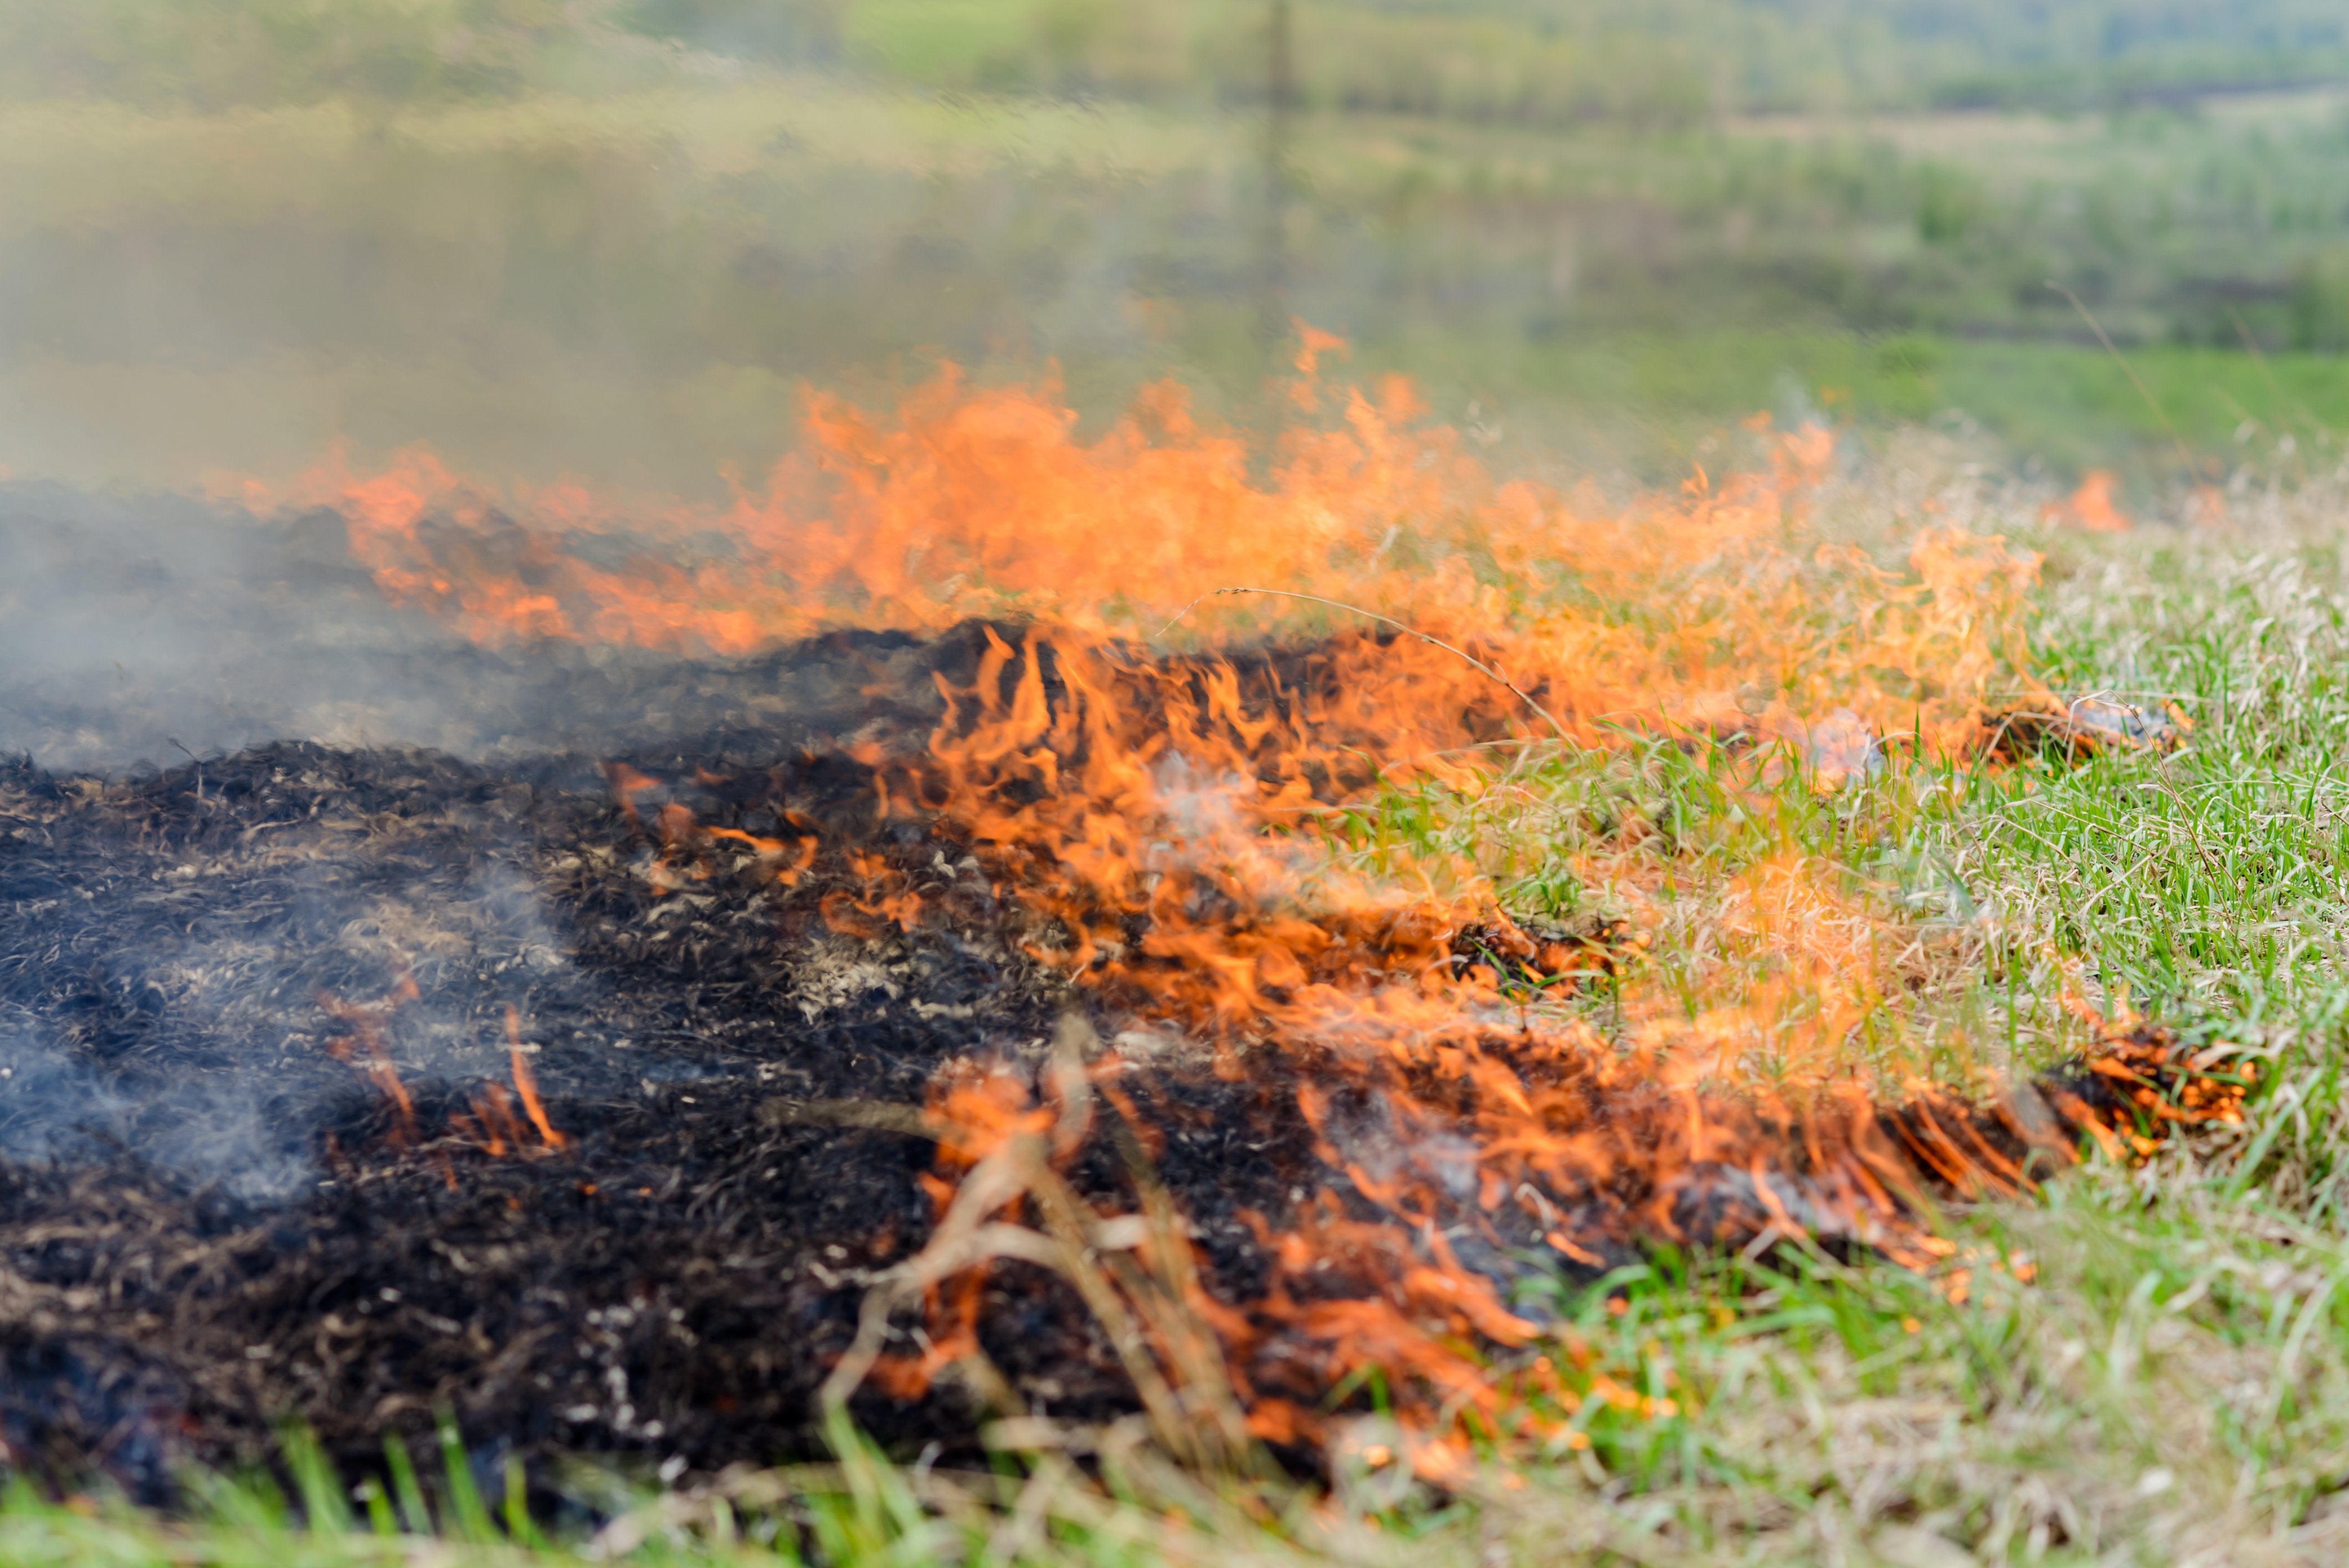 Black charred material burning on grass, a live fire in process of moving across a field. 